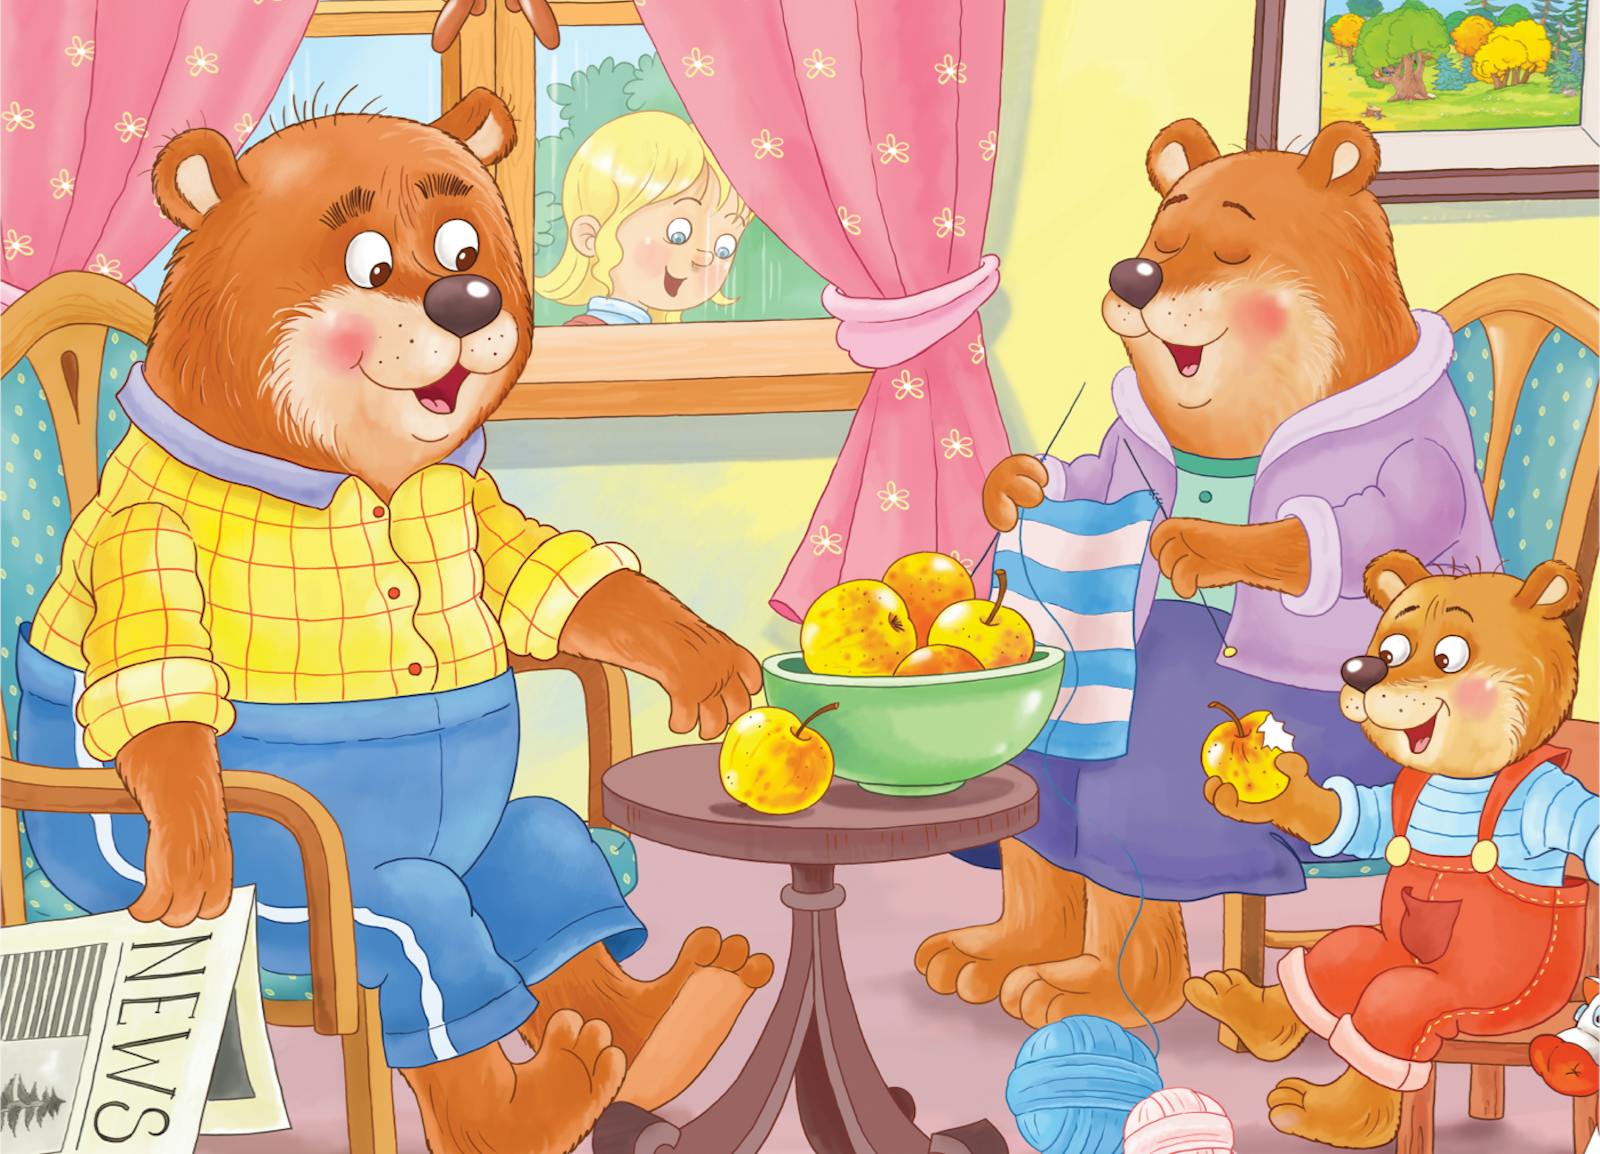 Goldilocks mobile game founder and her investor bears living happily ever after